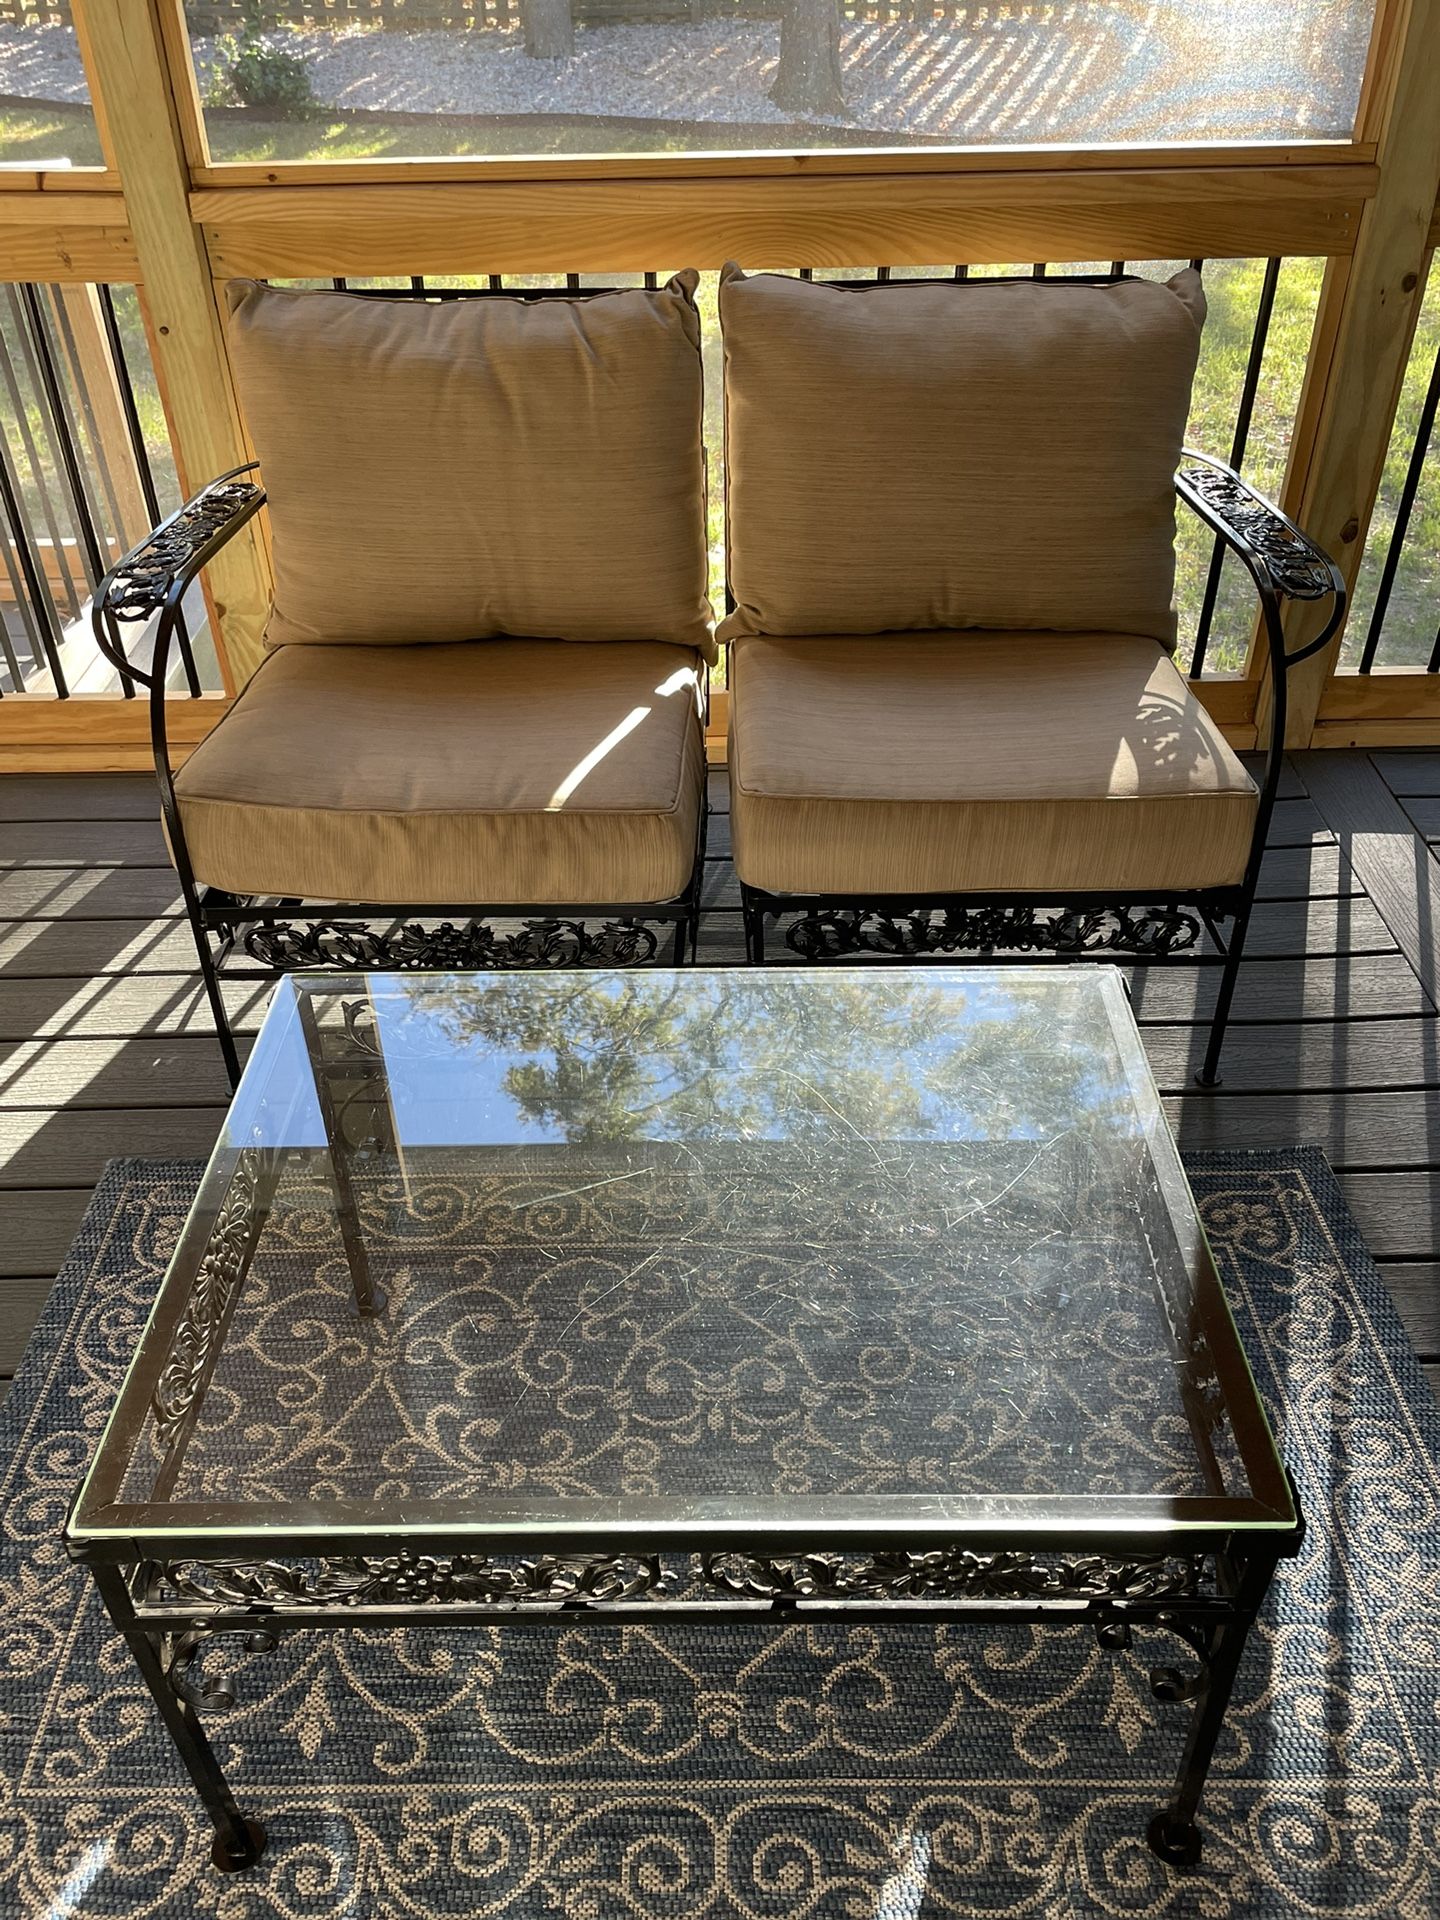 Wrought Iron Porch Set w/ Loveseat Armchairs with Glass top Coffee table 